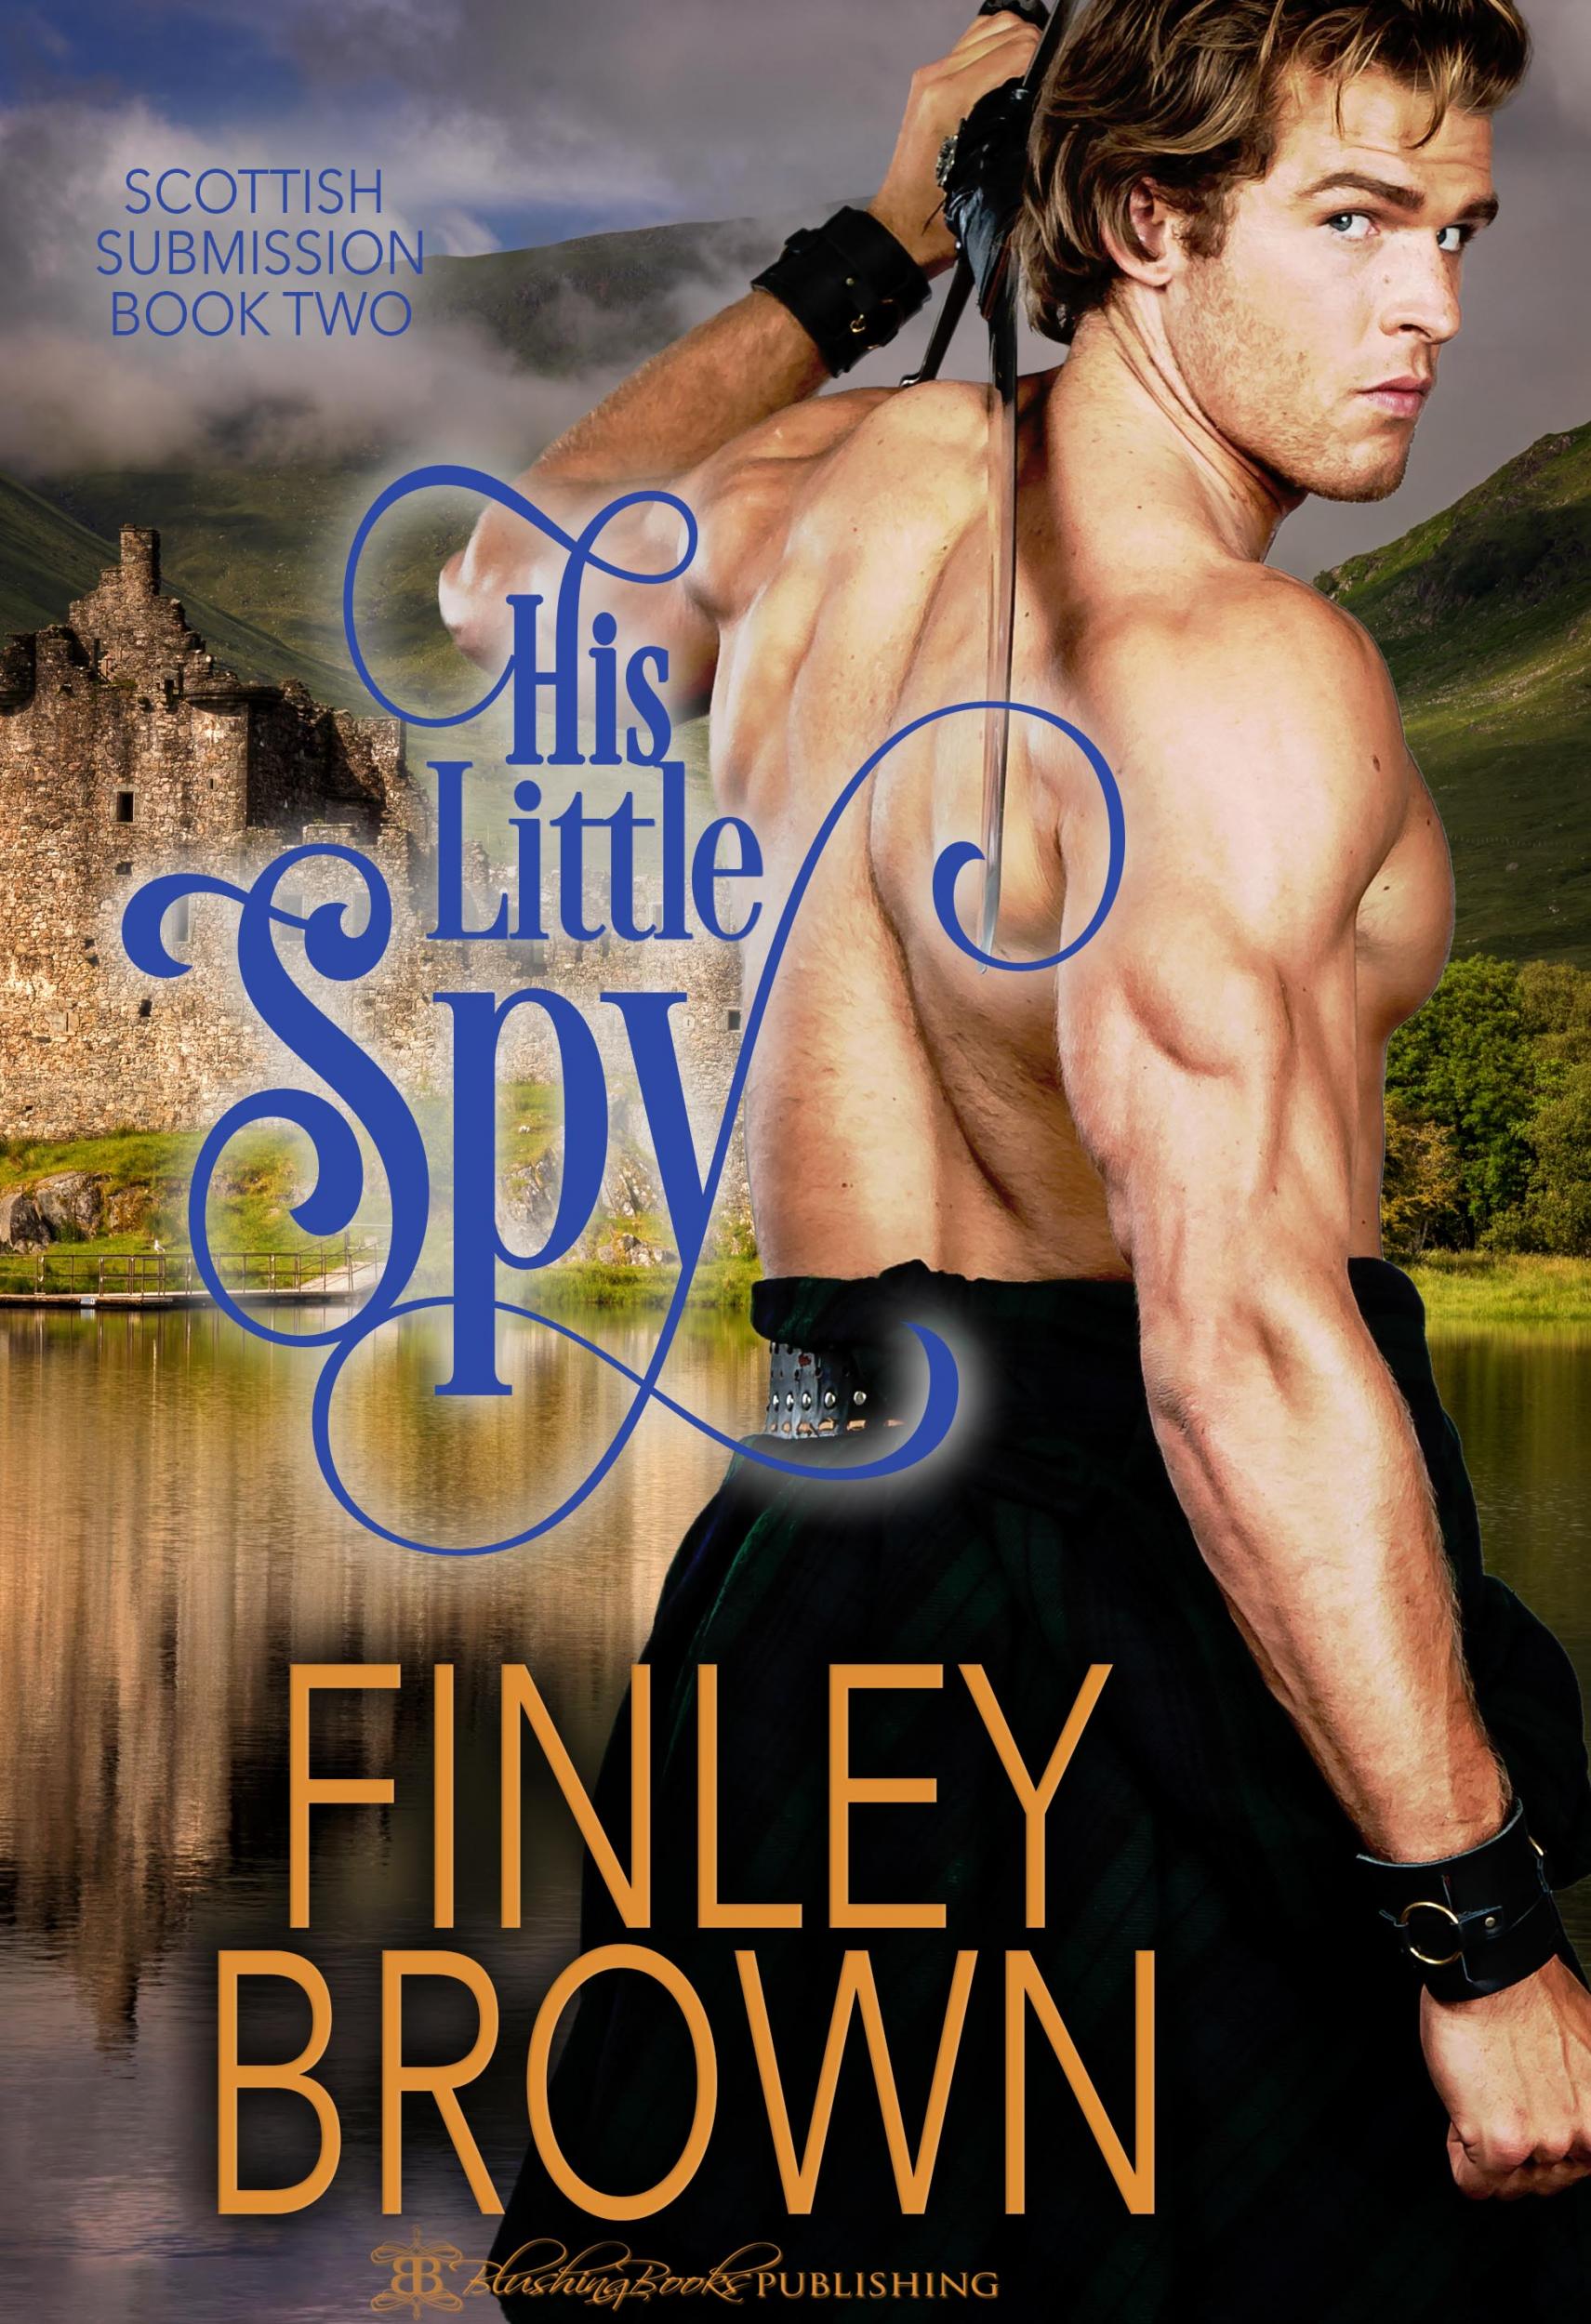 His Little Spy by Finley Brown